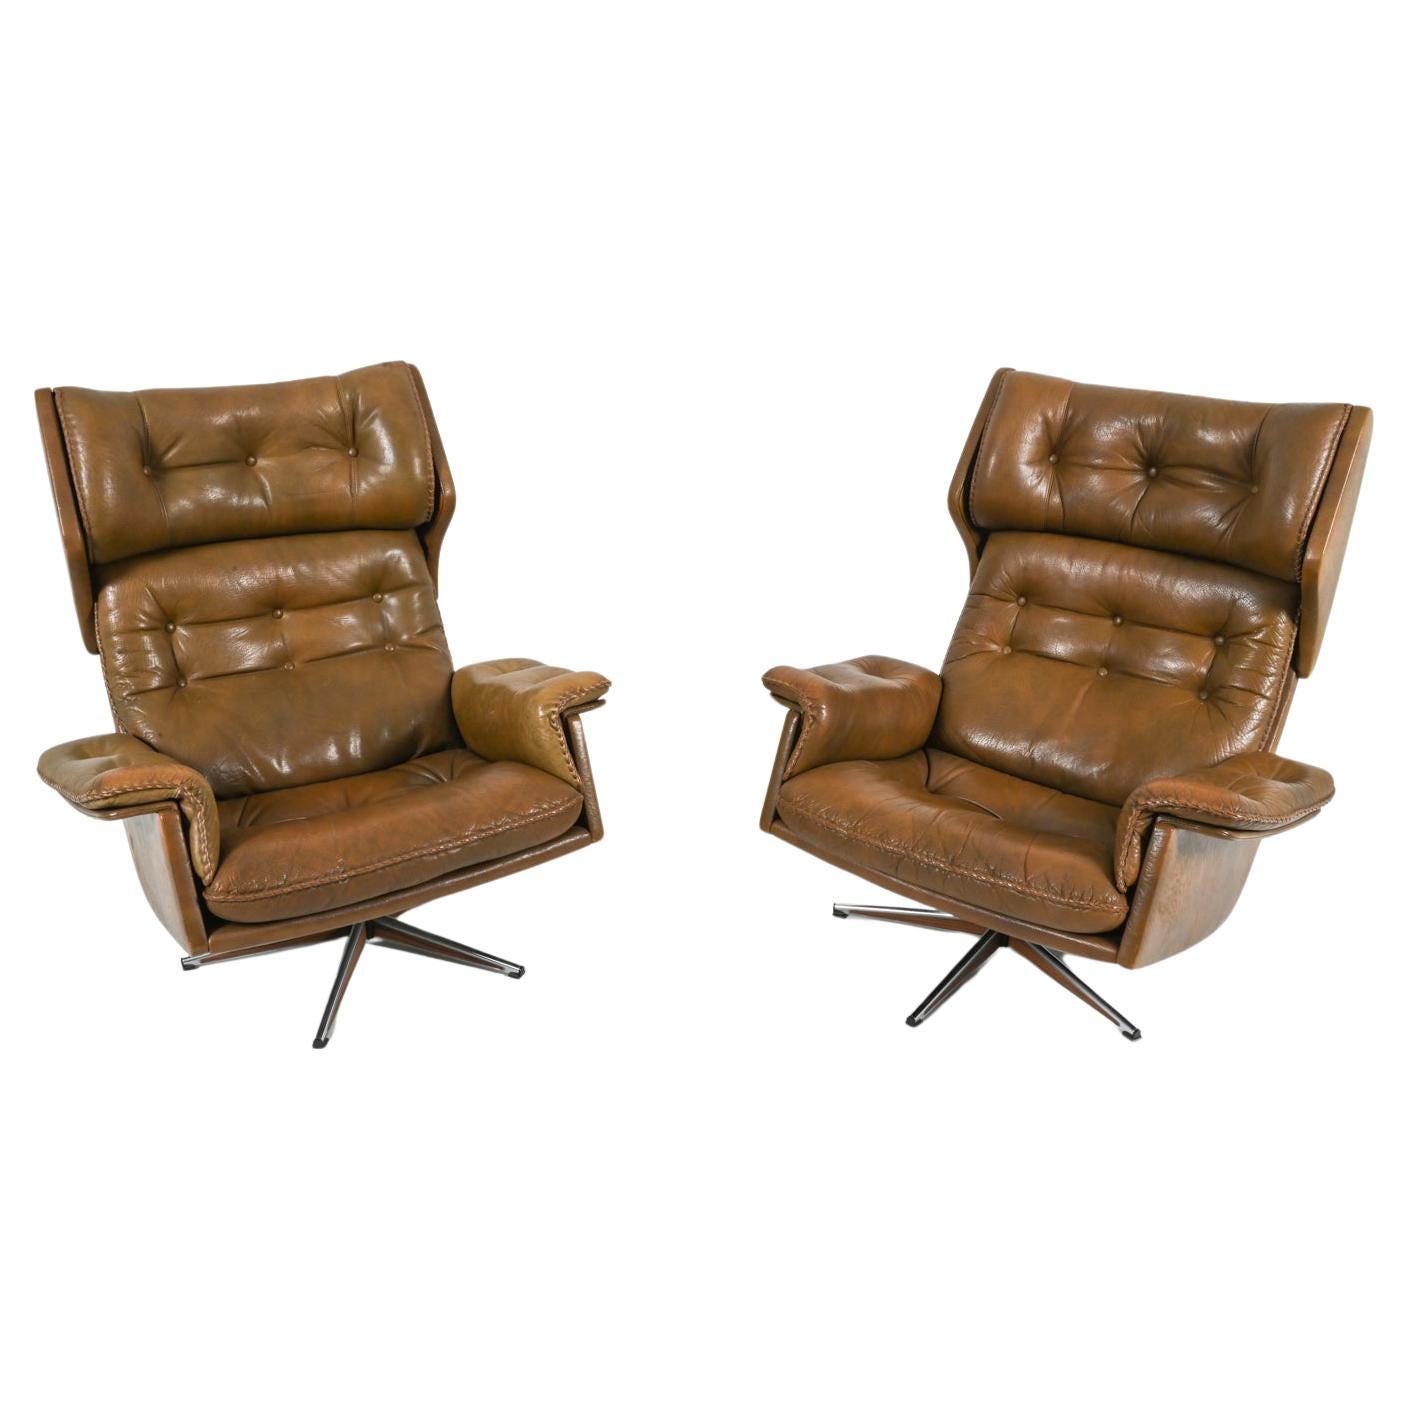 Pair of Buffalo Leather Swivel Chairs By Arne Norell, Swedish 1960's